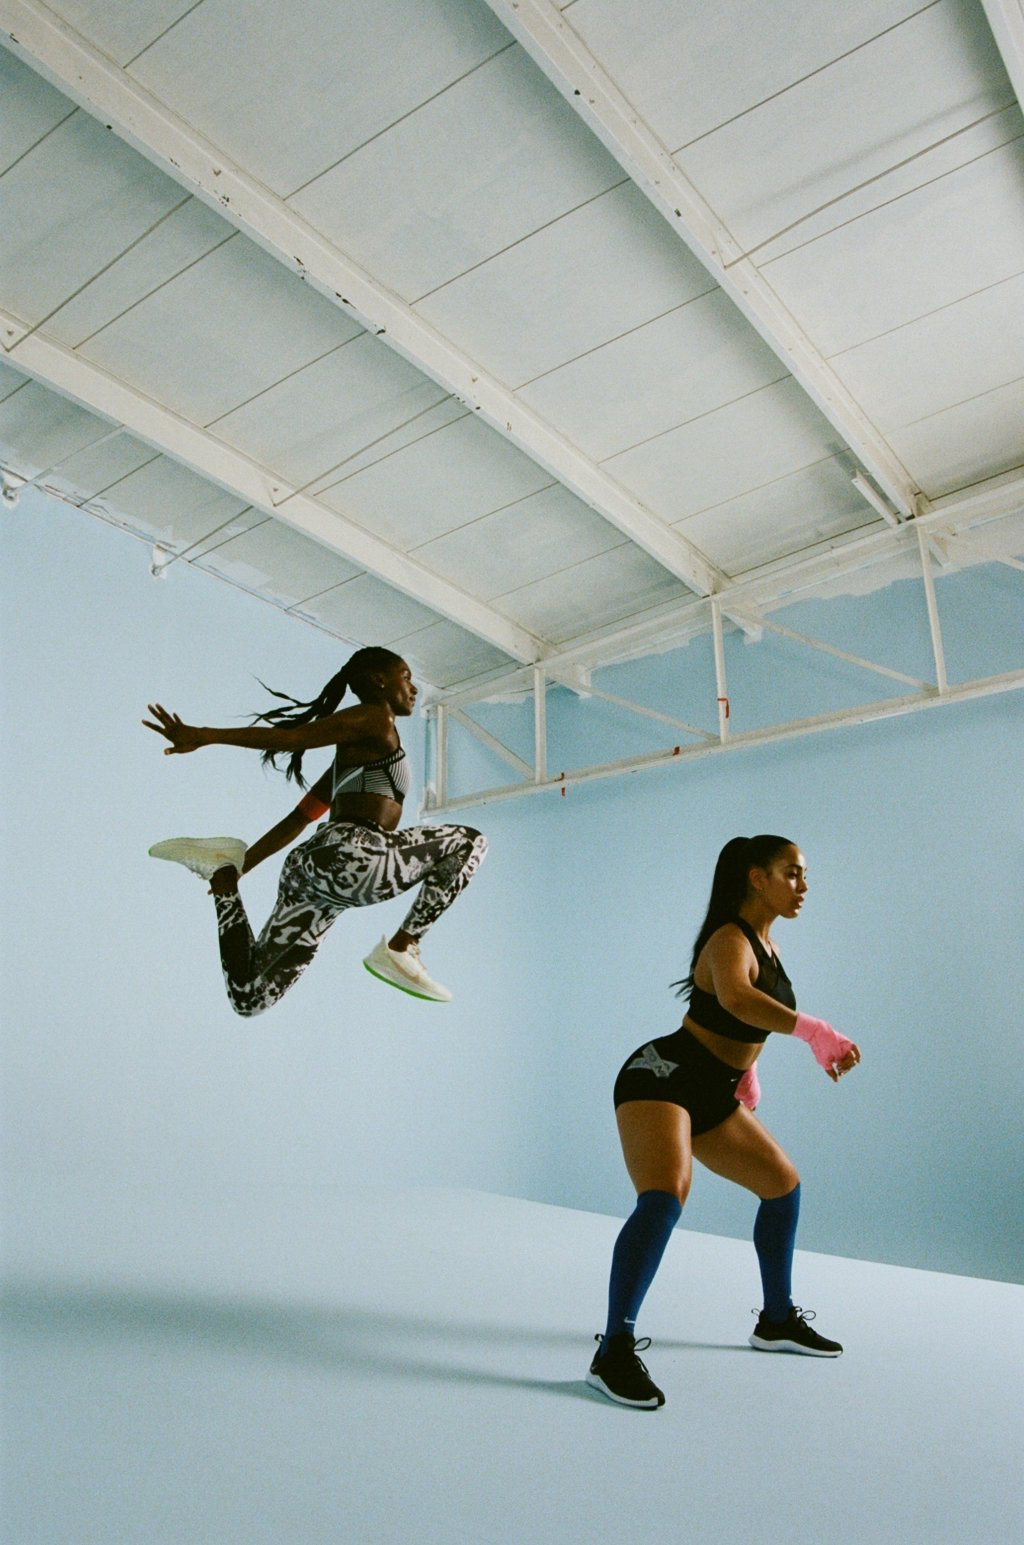 Nike x Invitation to Sport Campaign, 2019. Featuring Jorja Smith & Dina Asher-Smith.